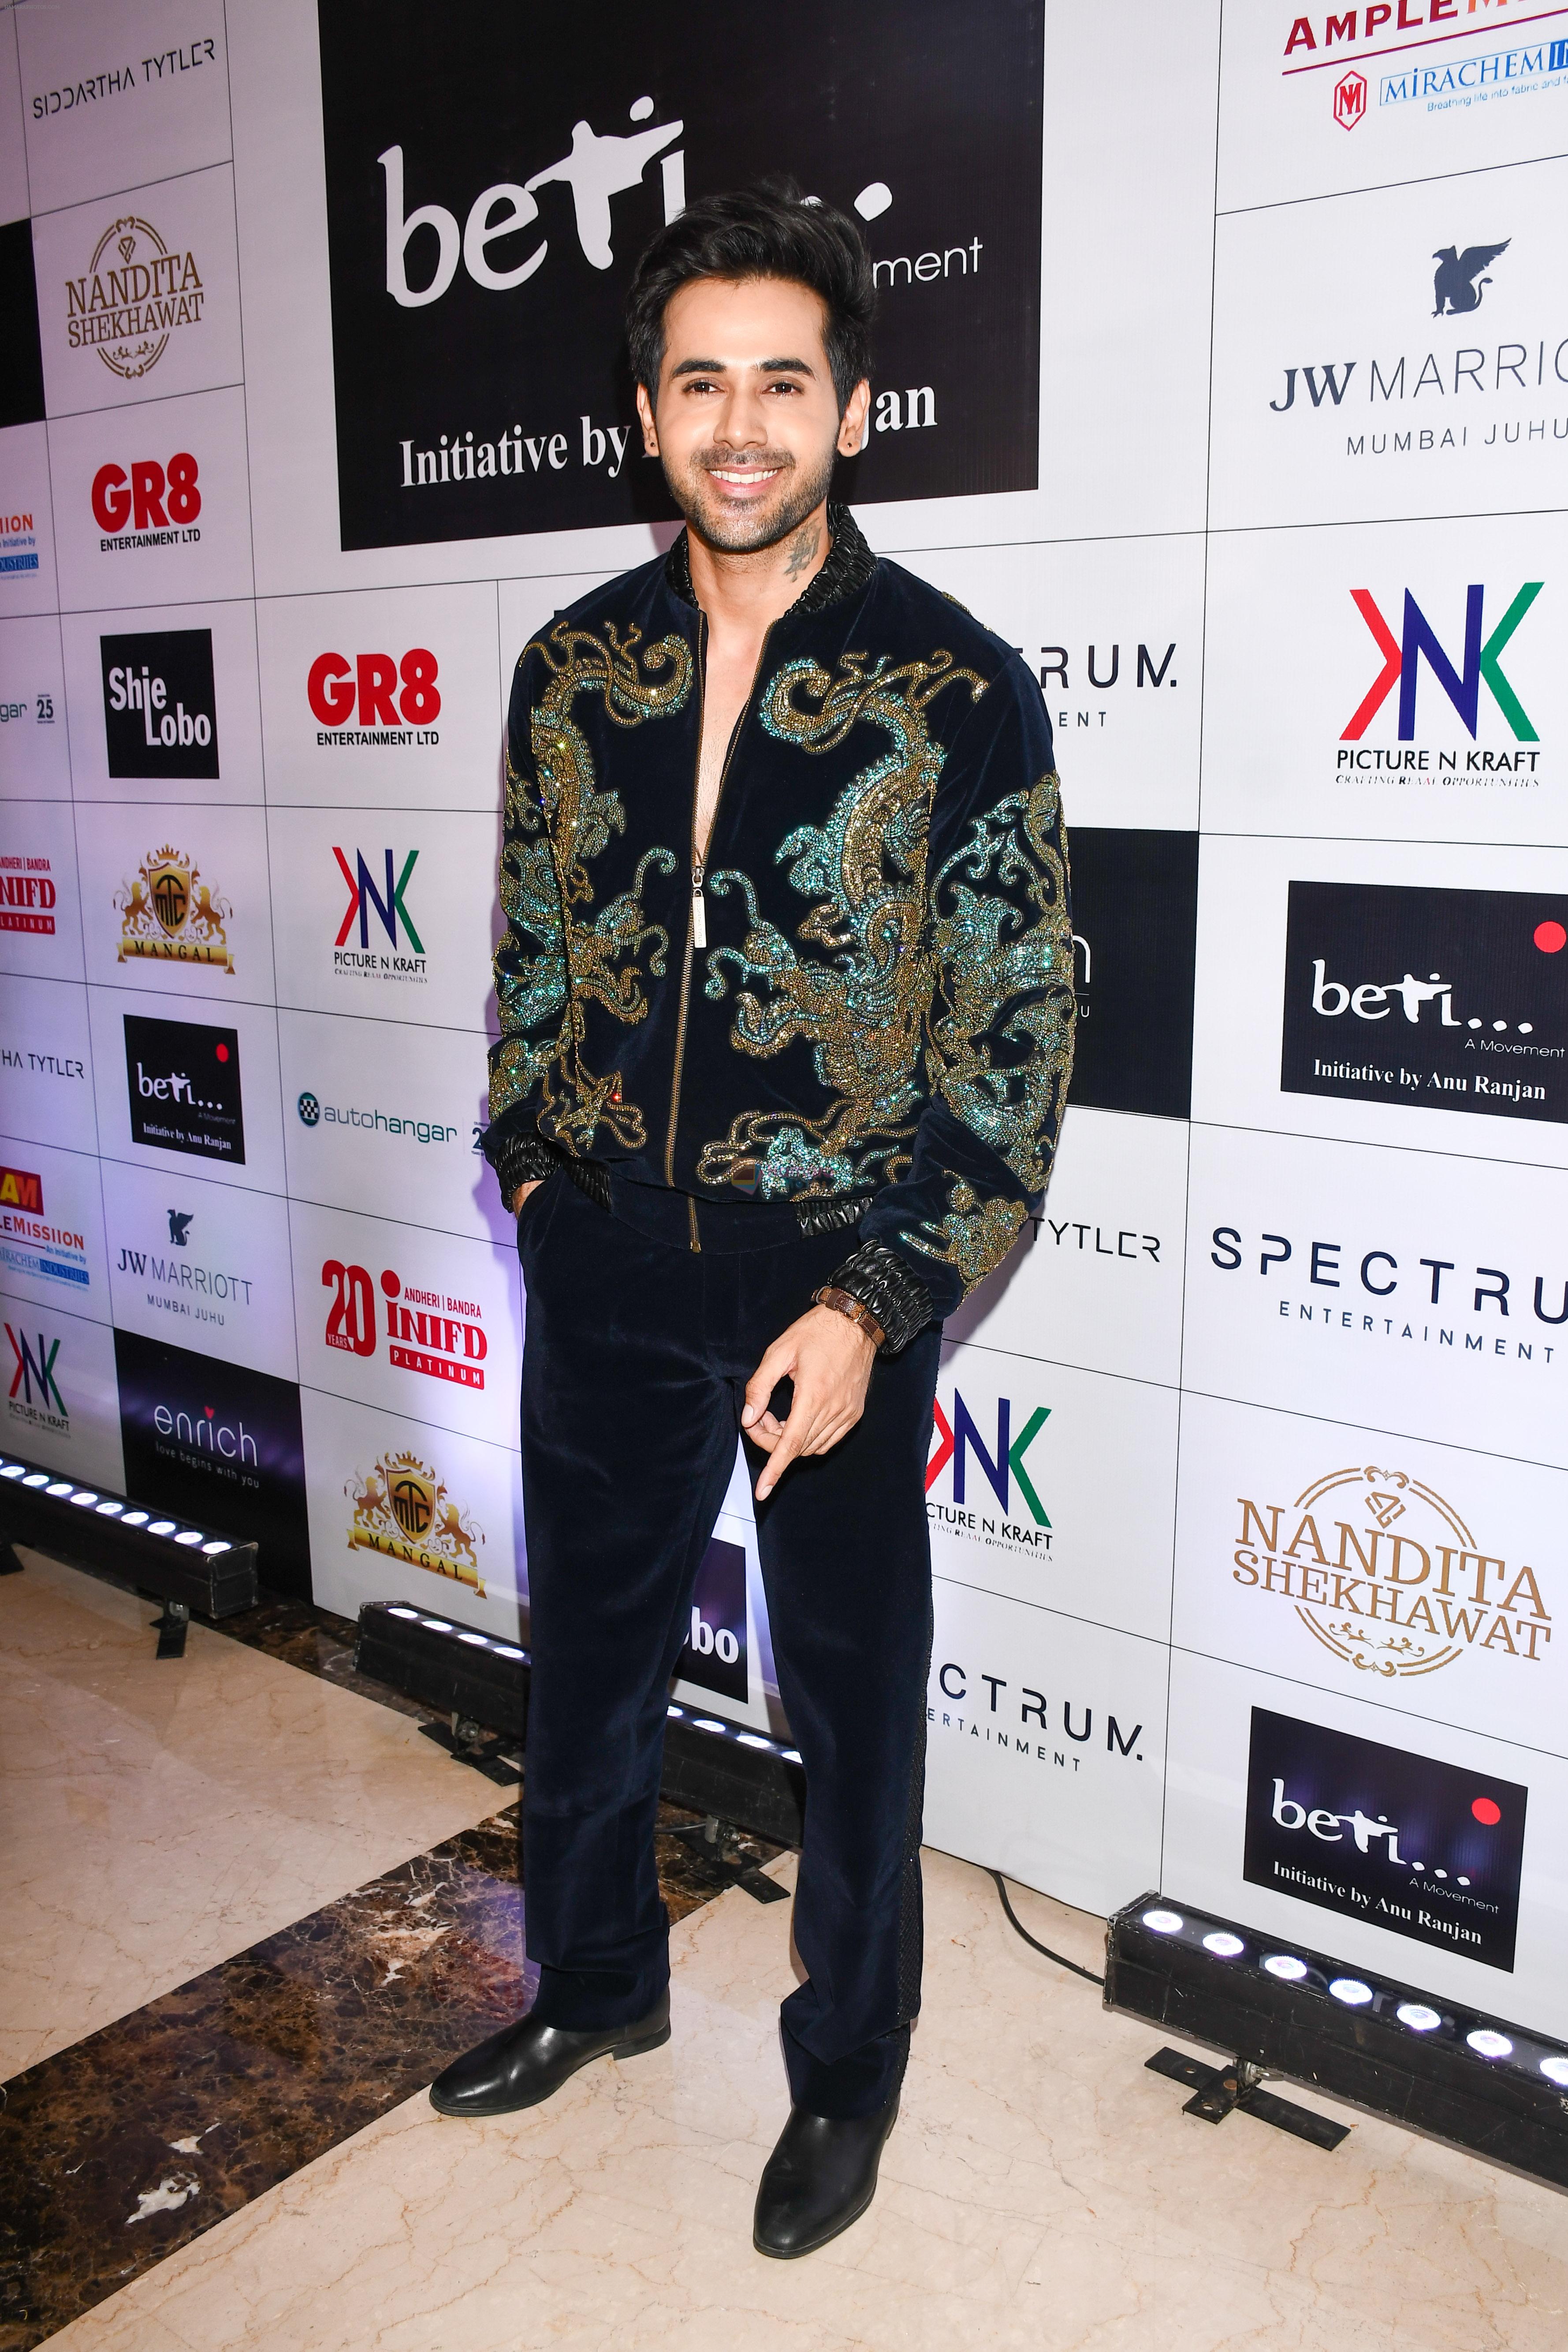 Randeep Rai during 17th Edition of BETI A Fashion Fundraiser Show on 14 May 2023